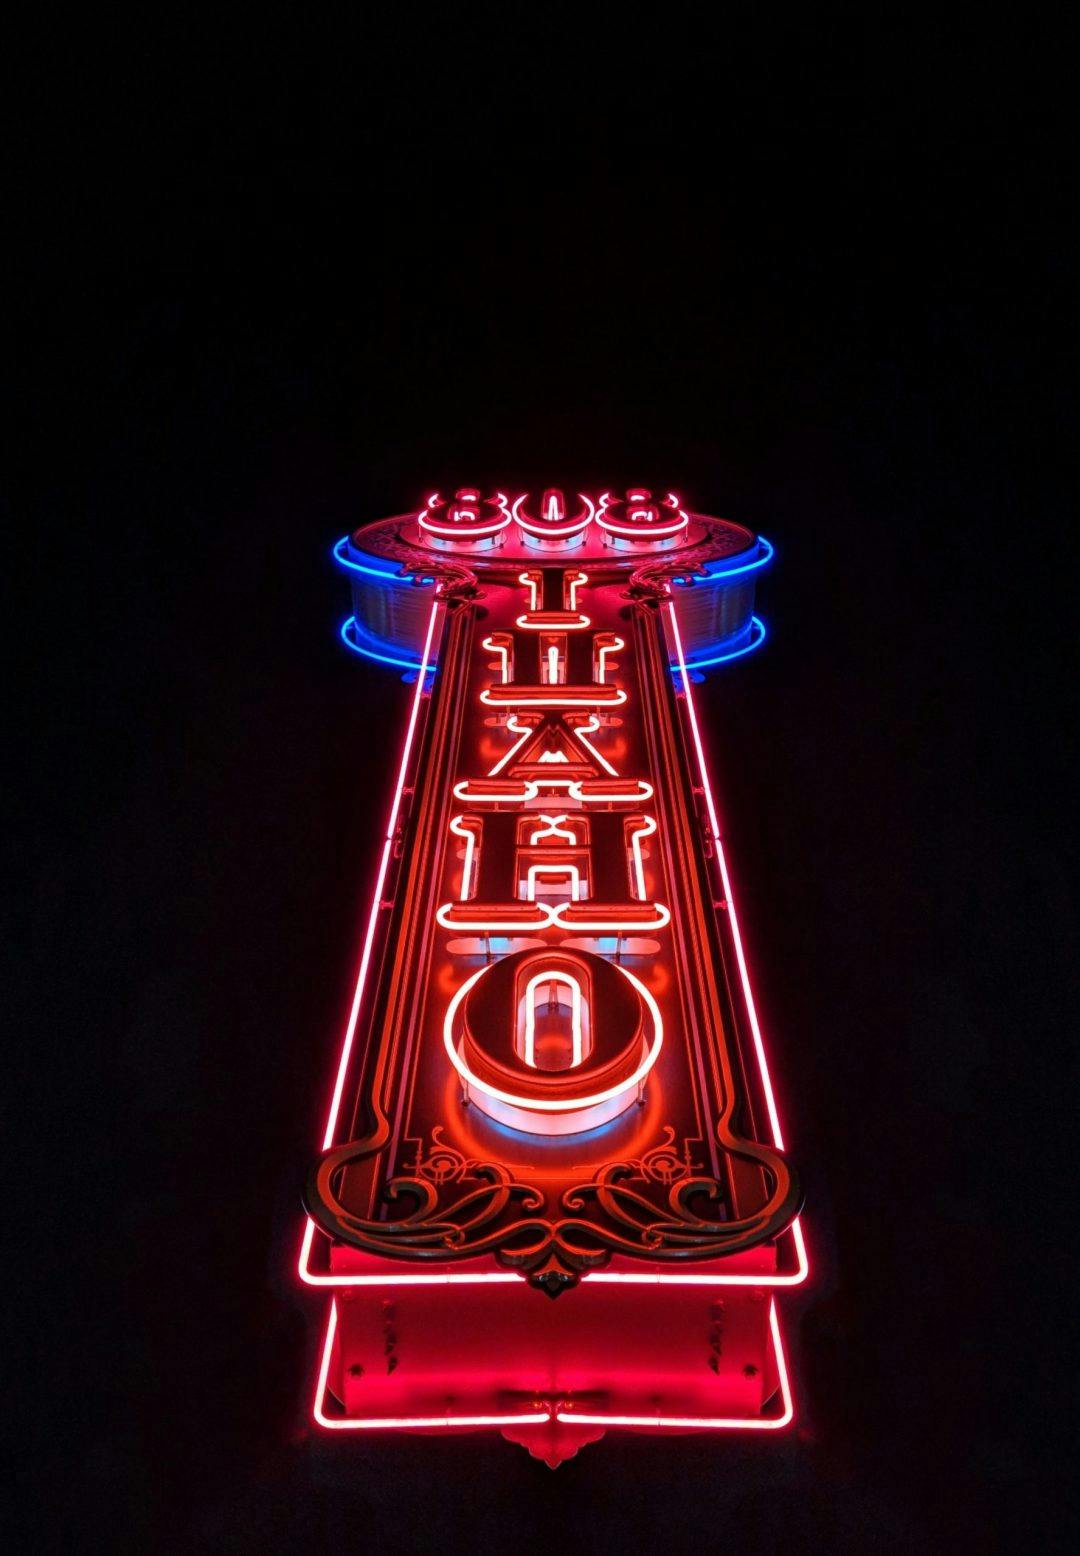 A neon sign